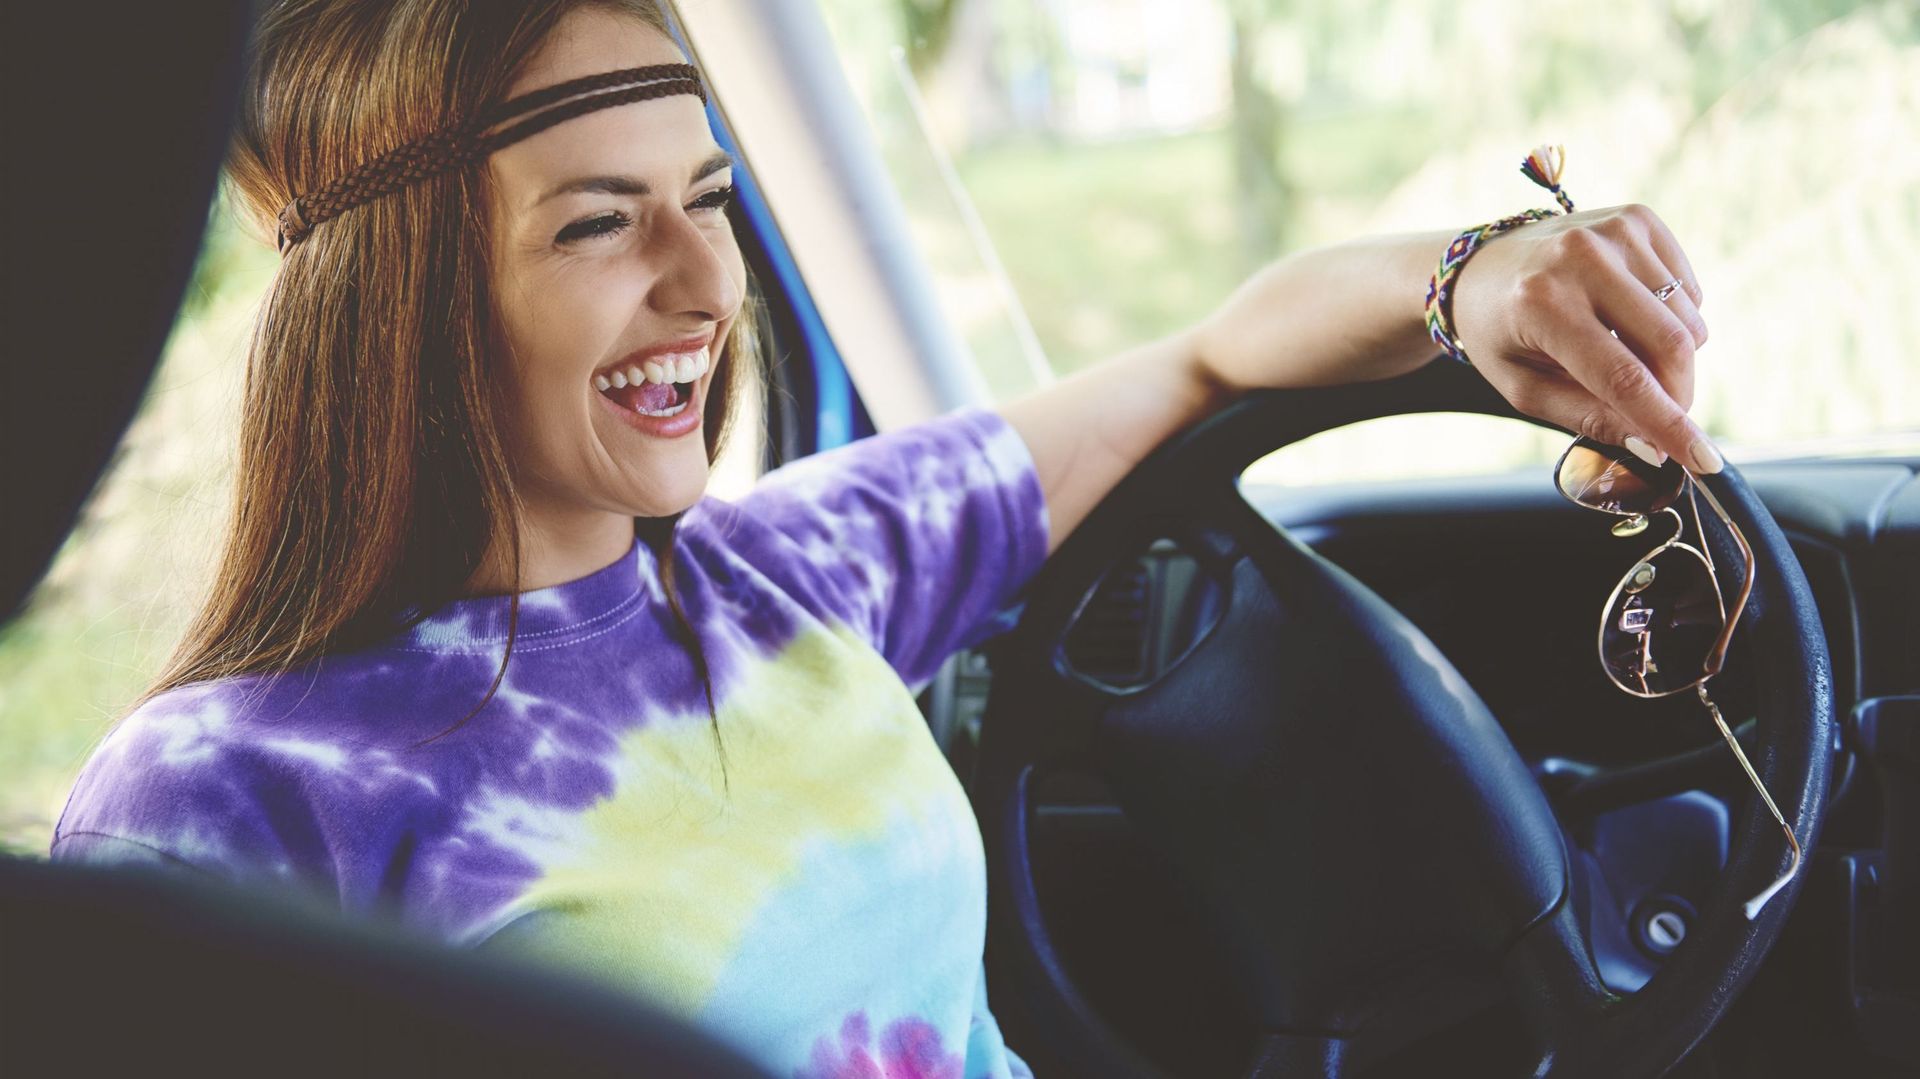 Young boho woman laughing in front seat of recreational van